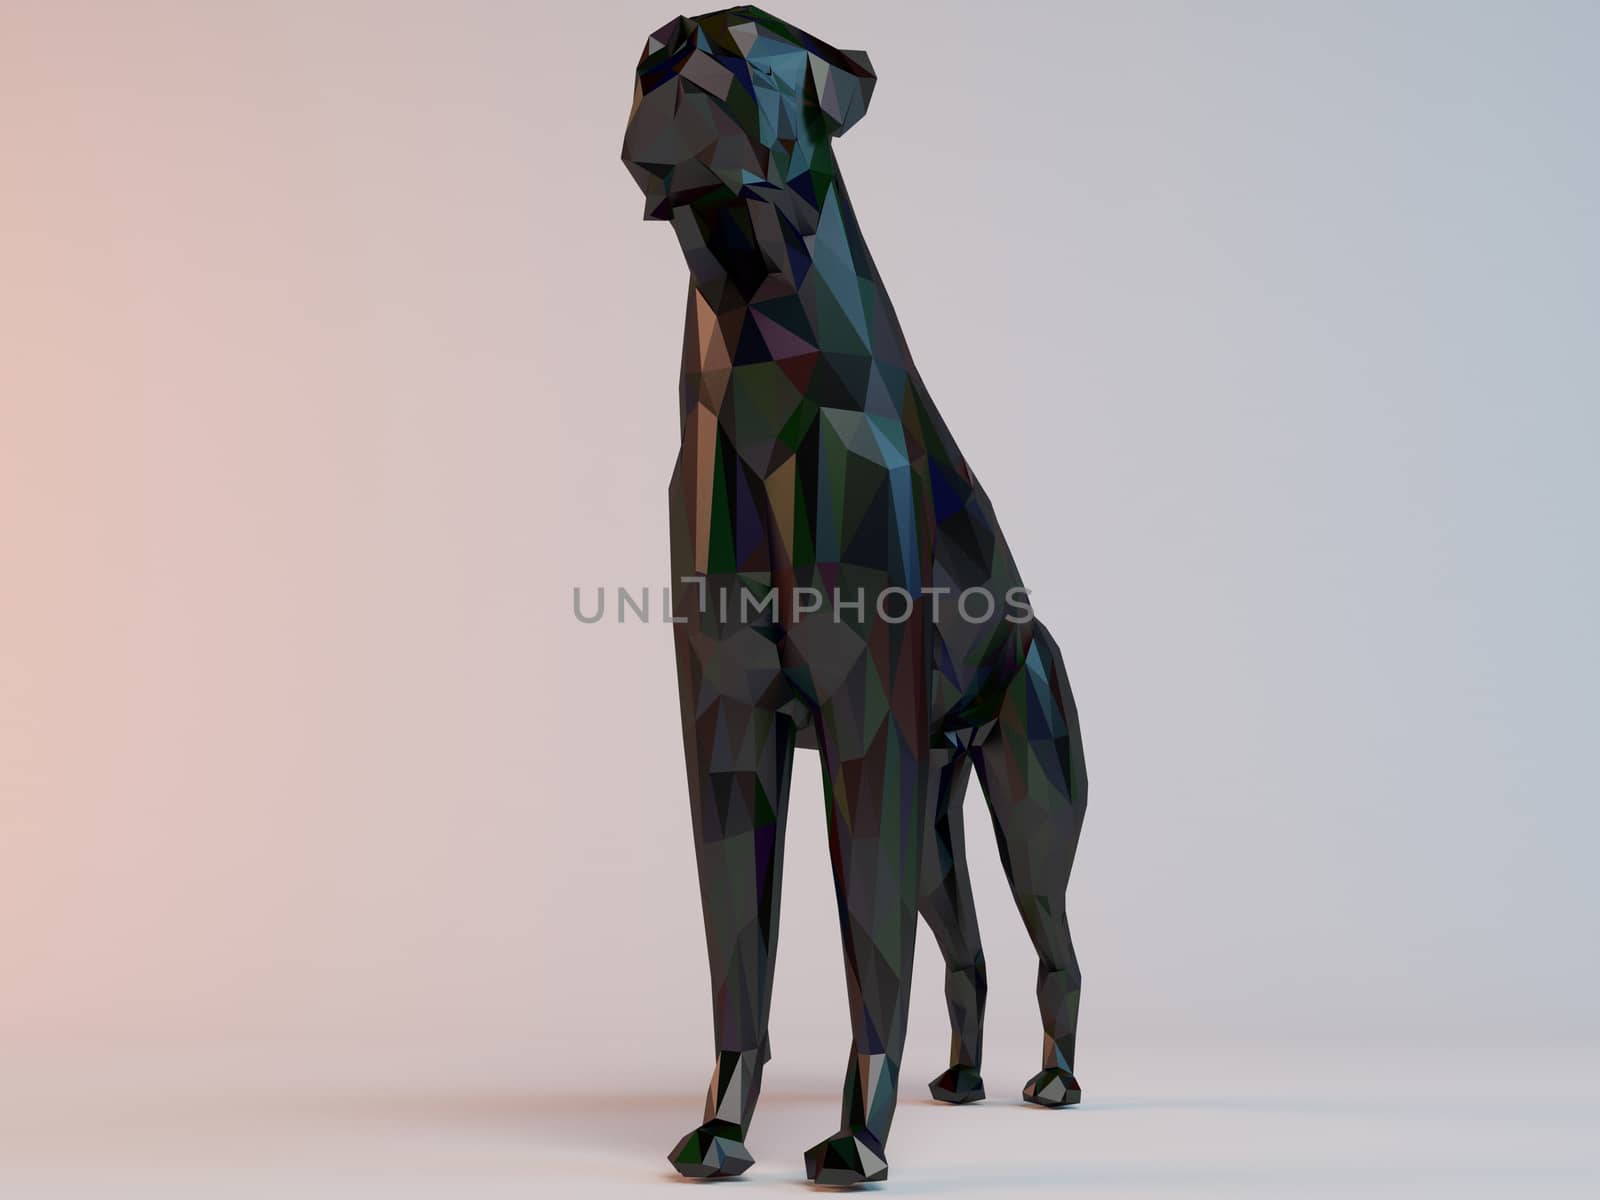 3D black low poly (dog) inside a white stage with high render quality to be used as a logo, medal, symbol, shape, emblem, icon, children story, or any other use.